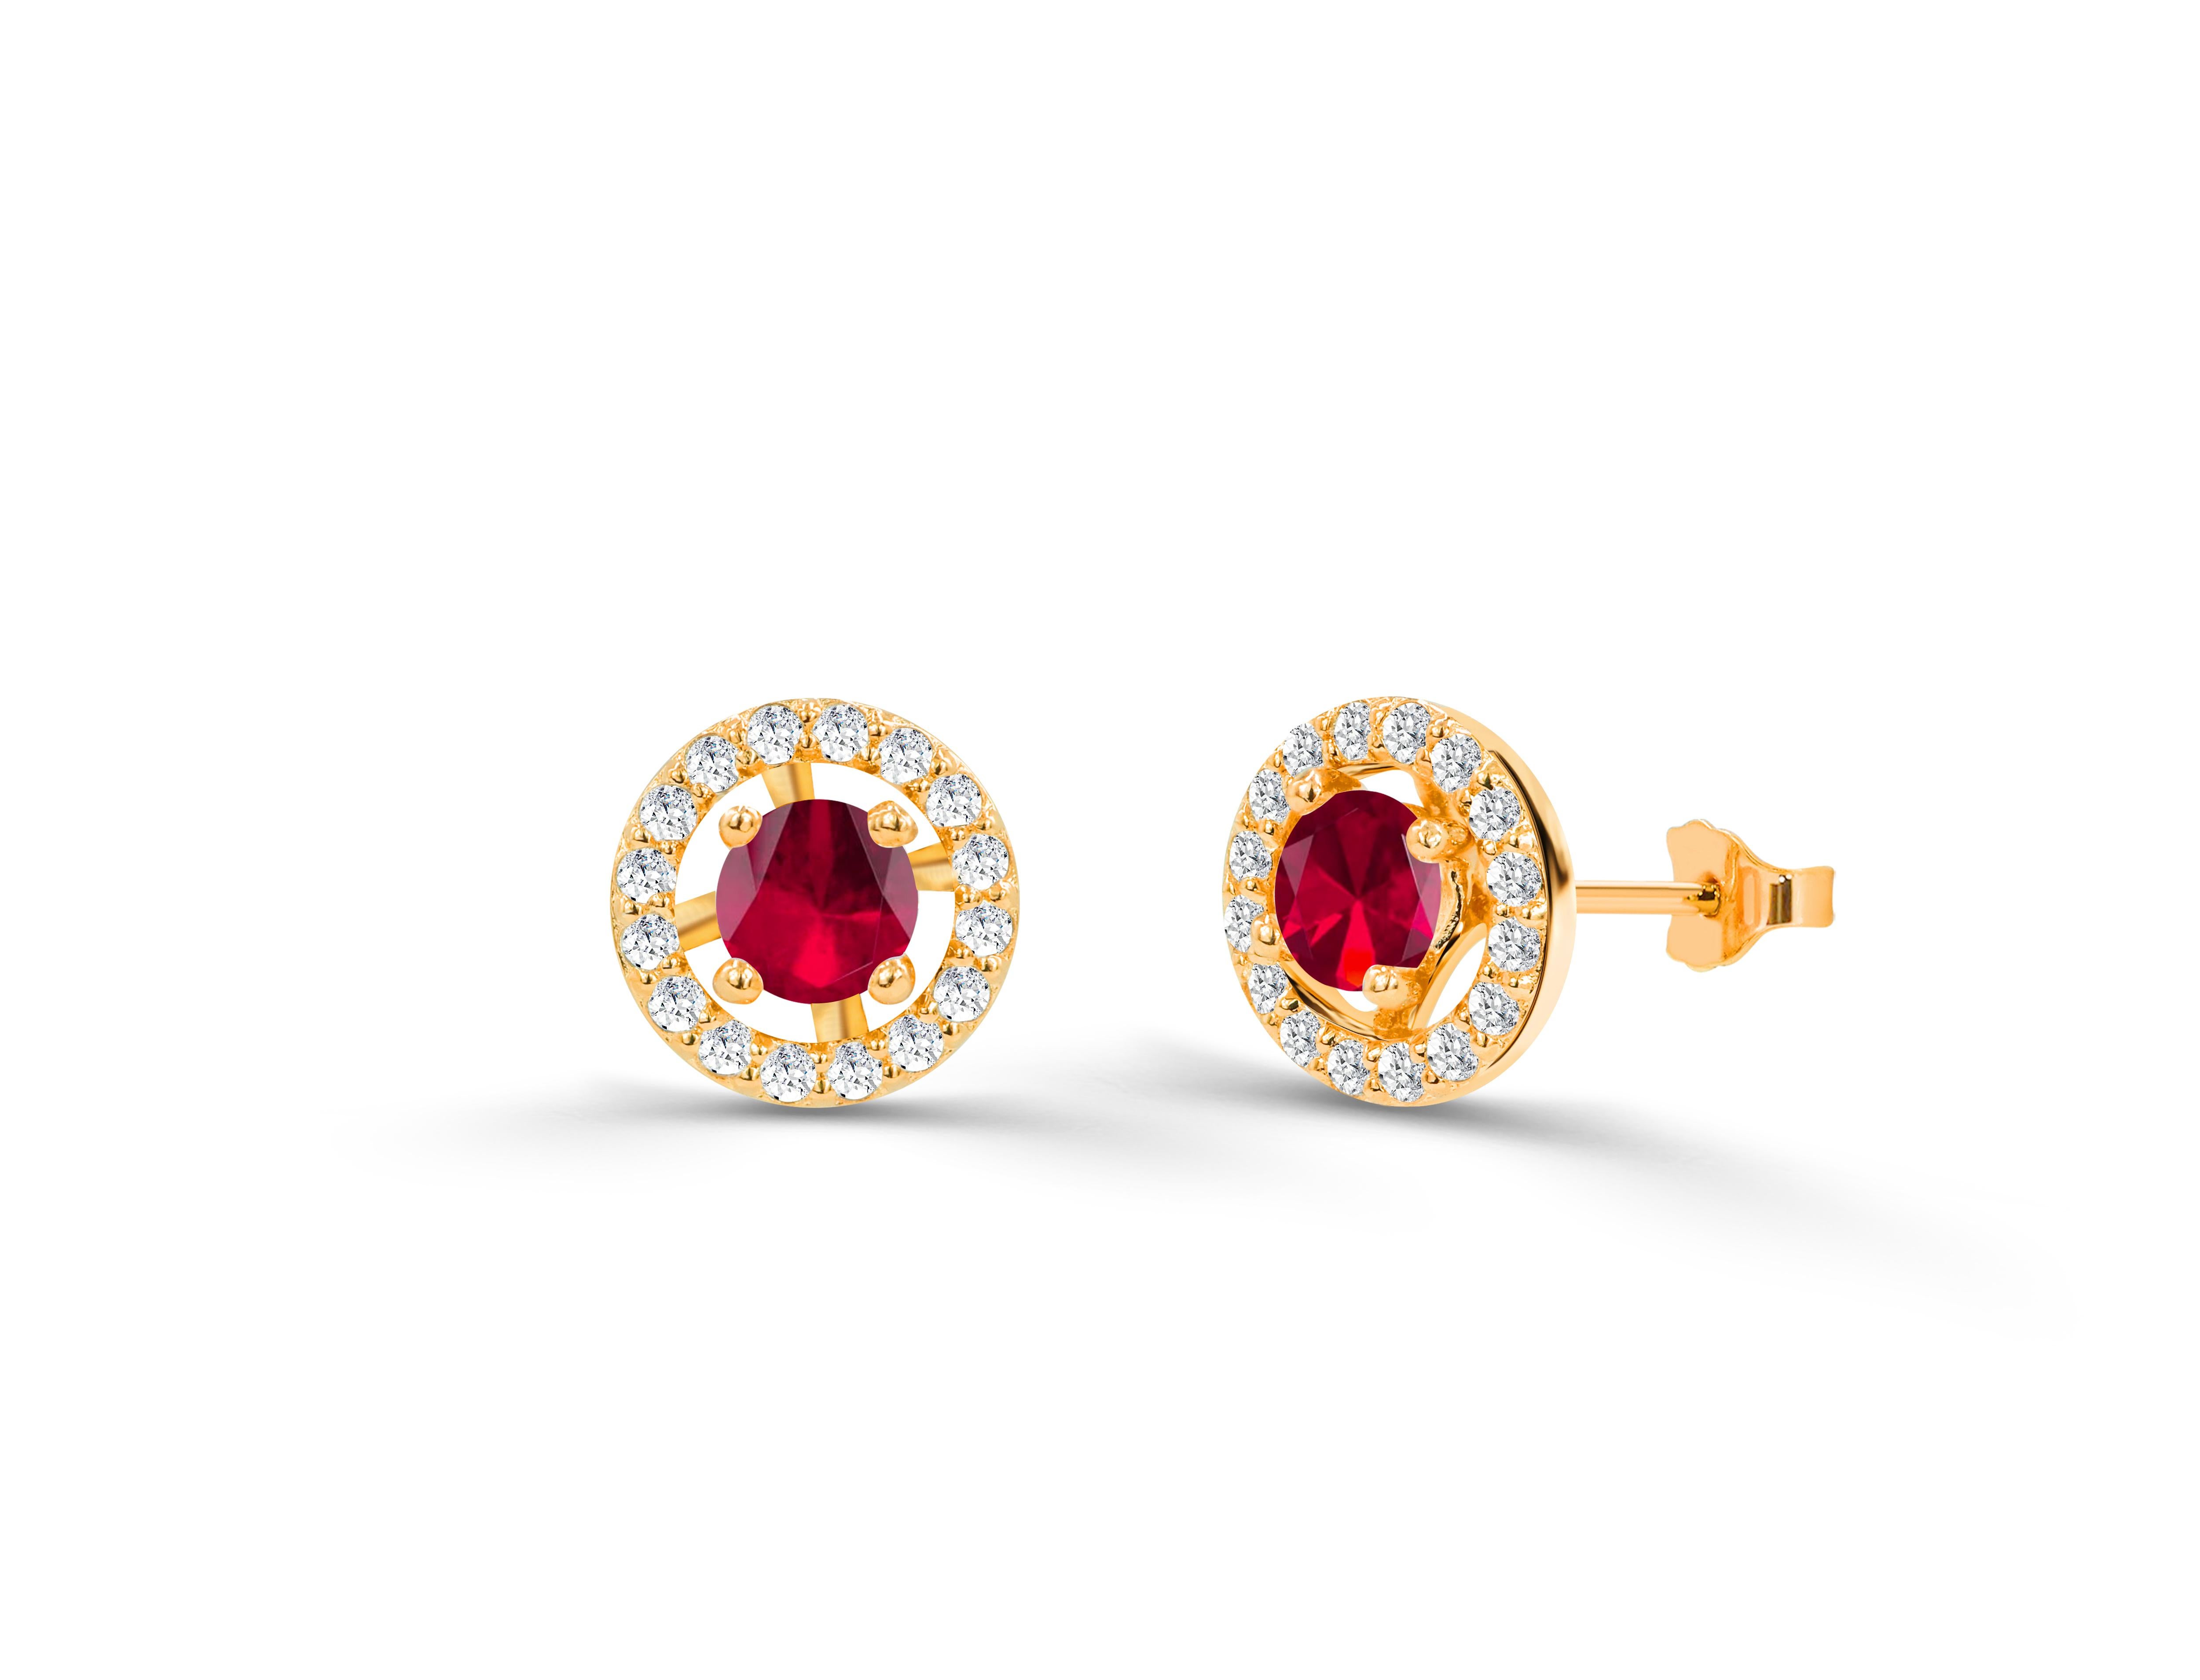 Modern 1.10ct Emerald, Ruby and Sapphire Halo Studs Earrings with Diamonds in 14k Gold For Sale